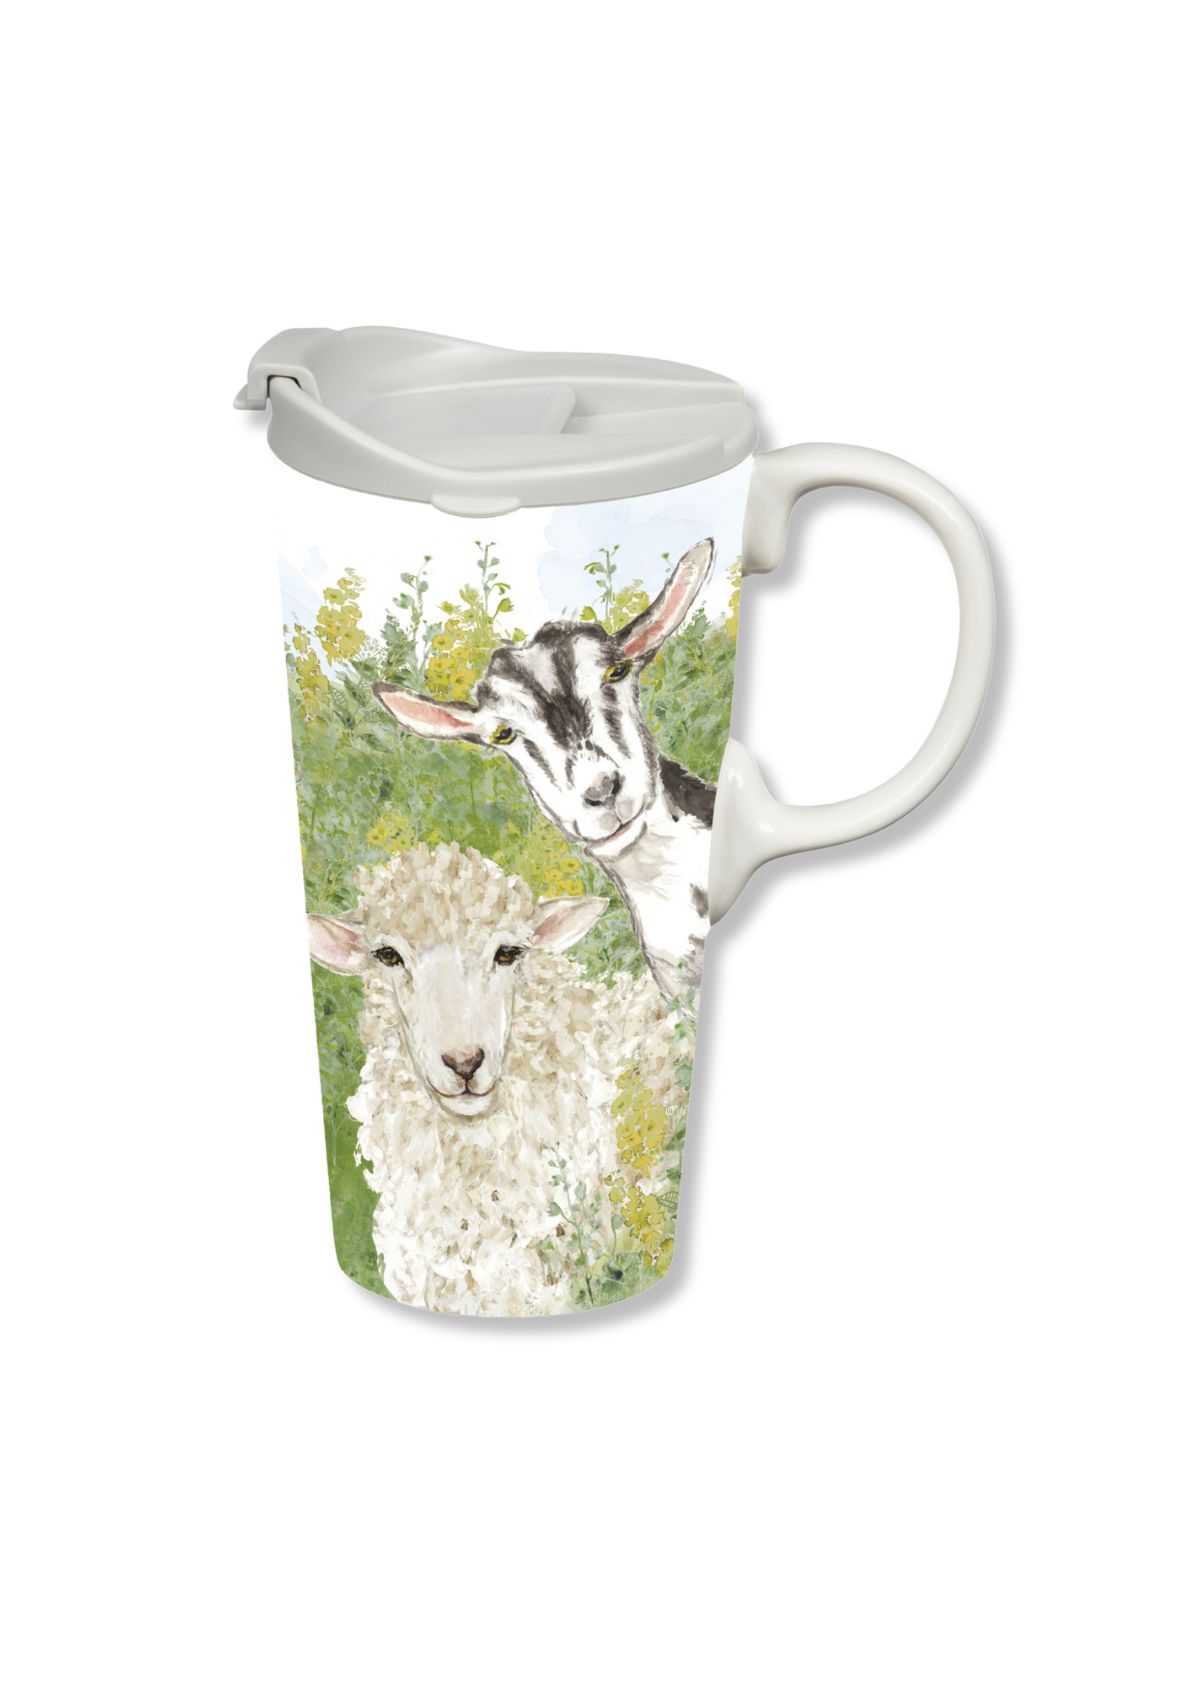 Black white goat and white sheep in green grass print. White lid and handle.